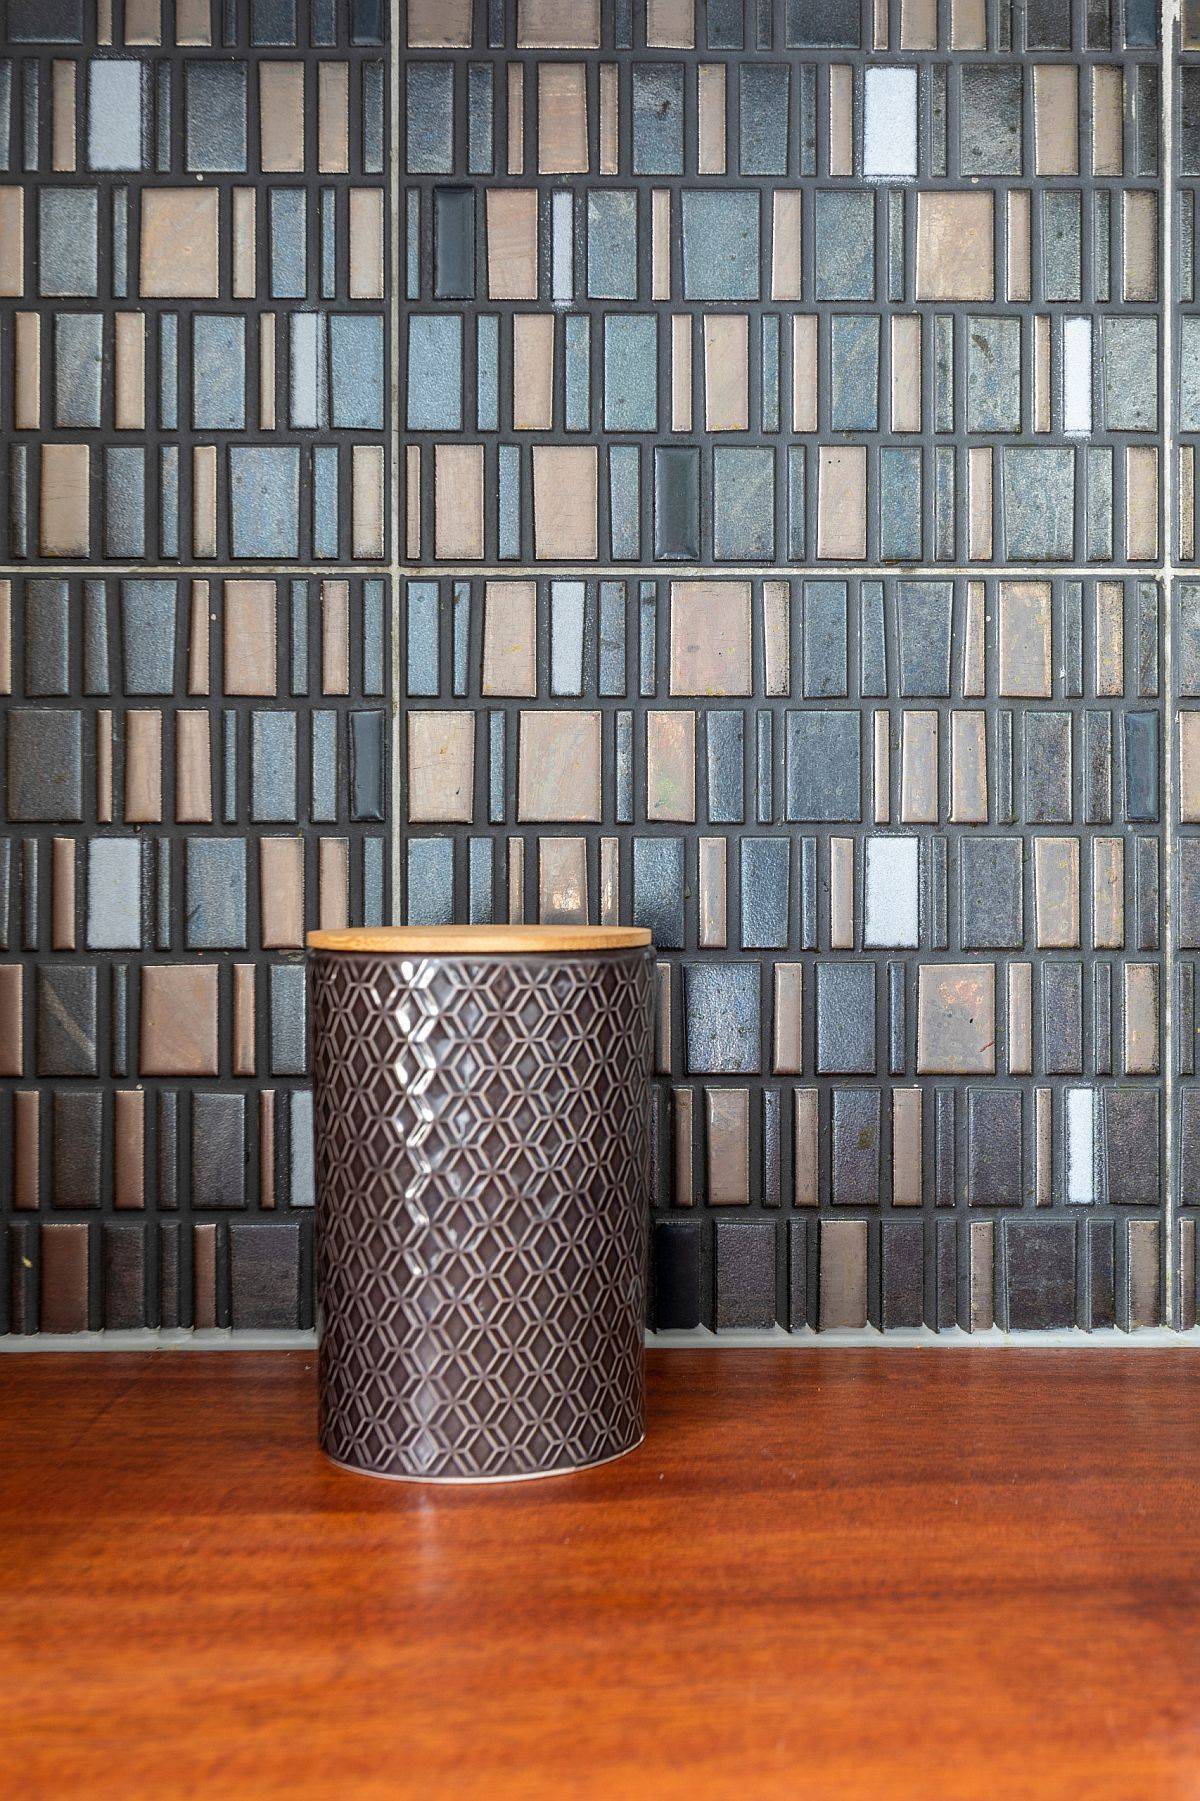 Taking a closer look at the custom mosaic backsplash in the small apartment kitchen